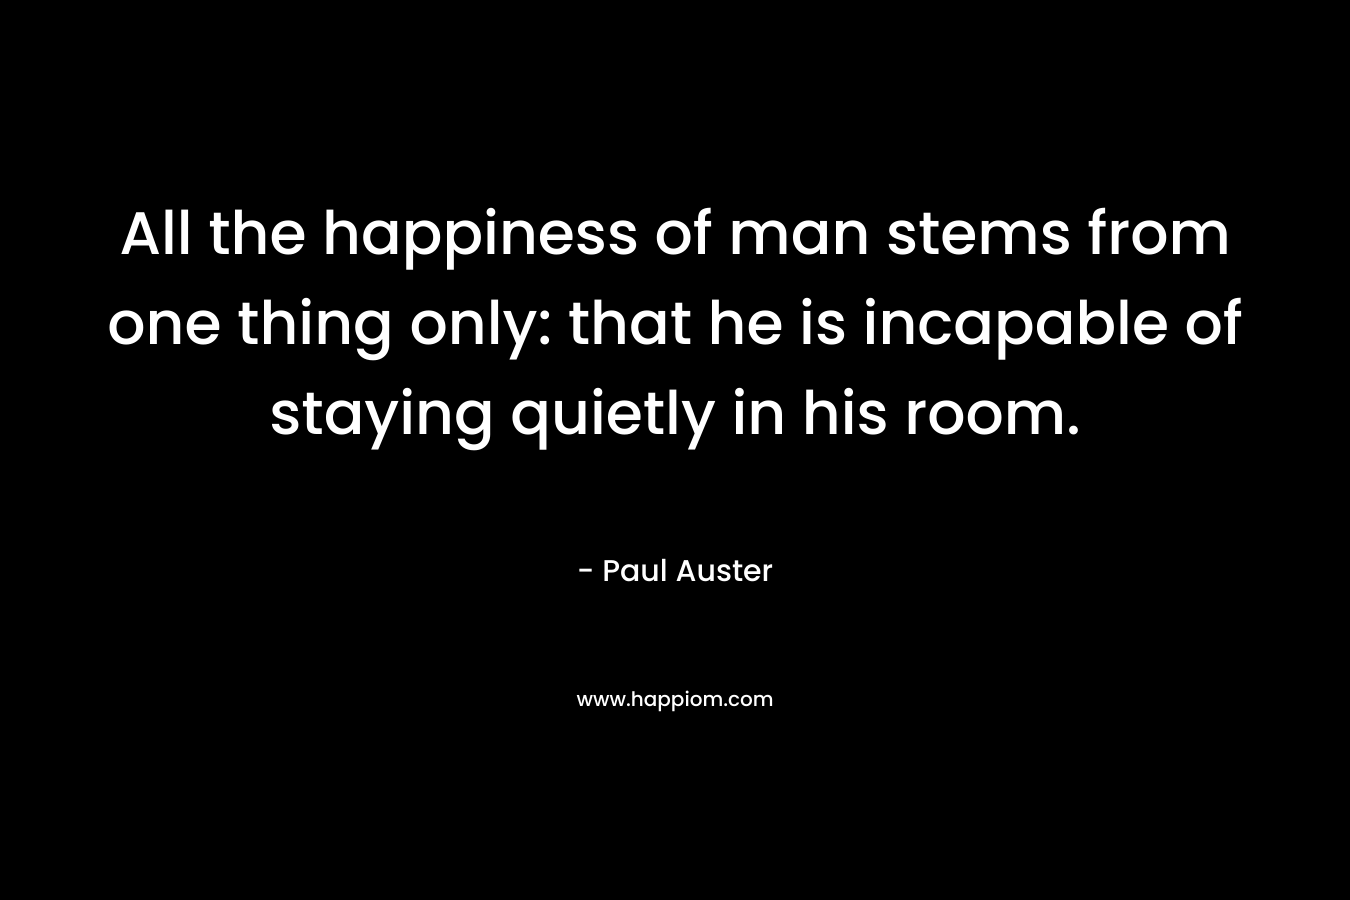 All the happiness of man stems from one thing only: that he is incapable of staying quietly in his room.